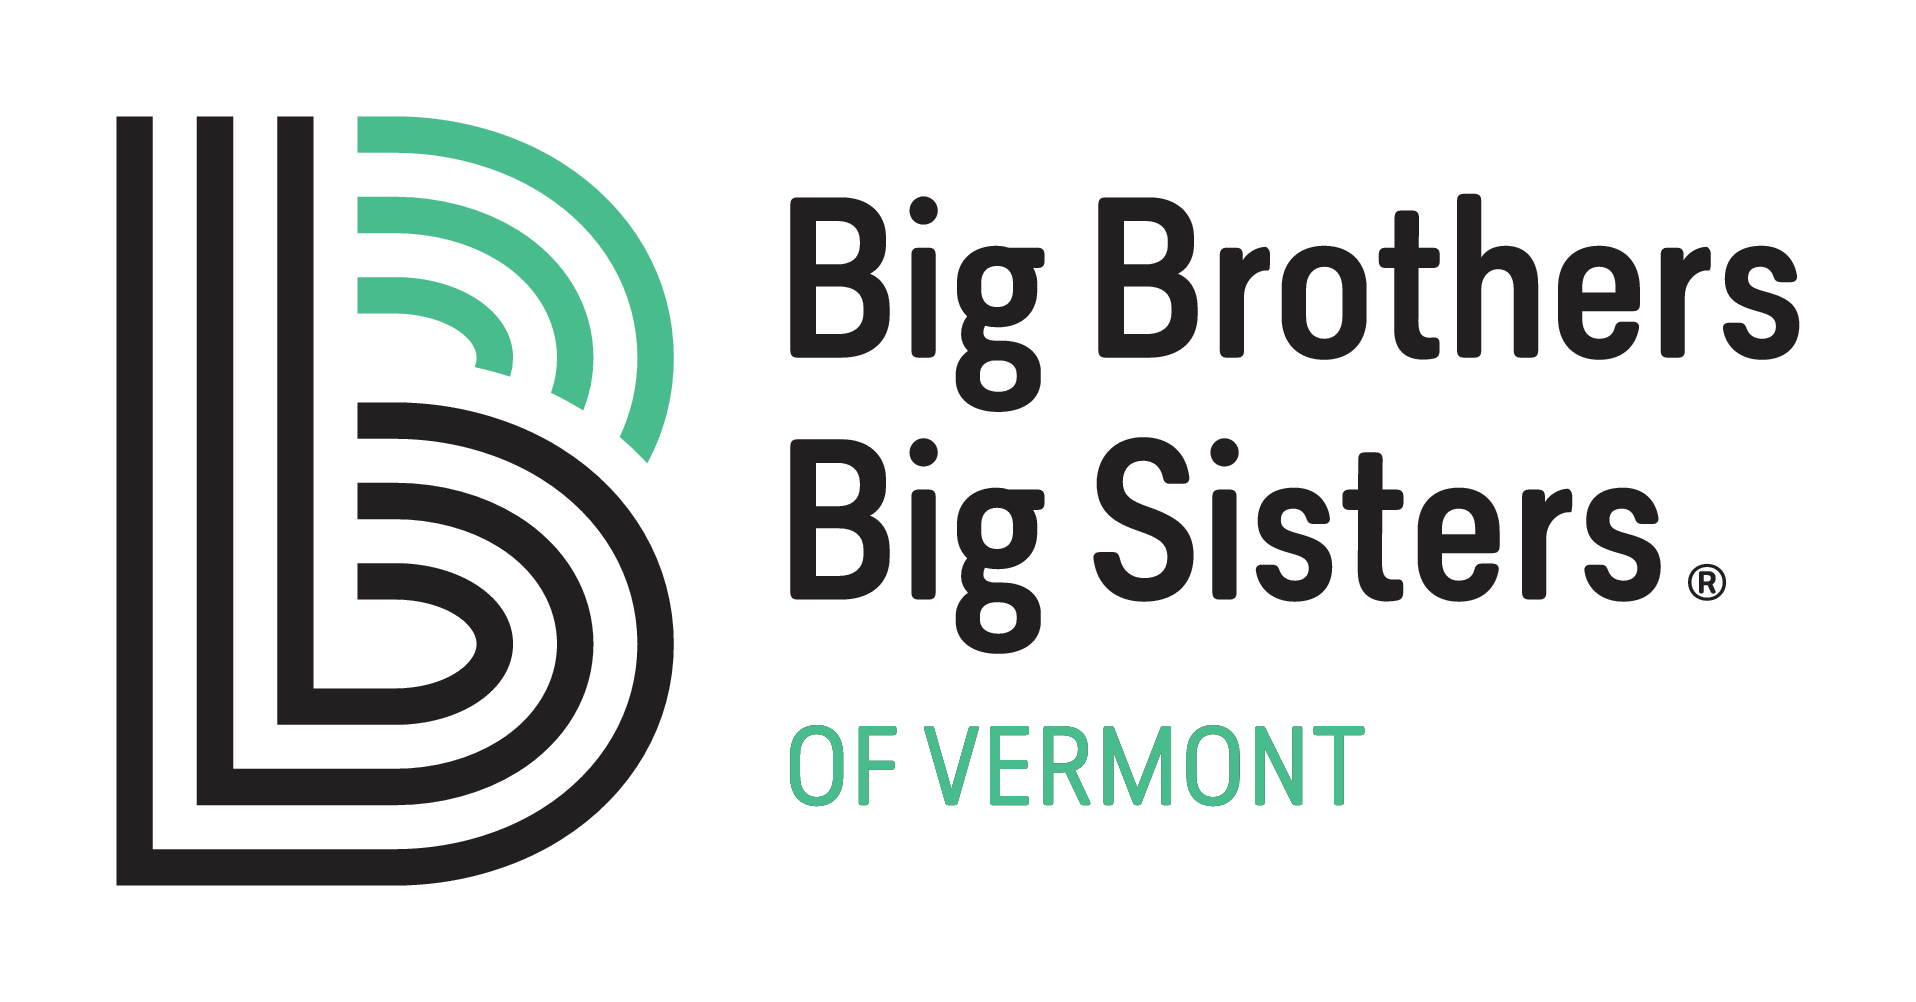 Big Brothers Big Sisters of Vermont logo